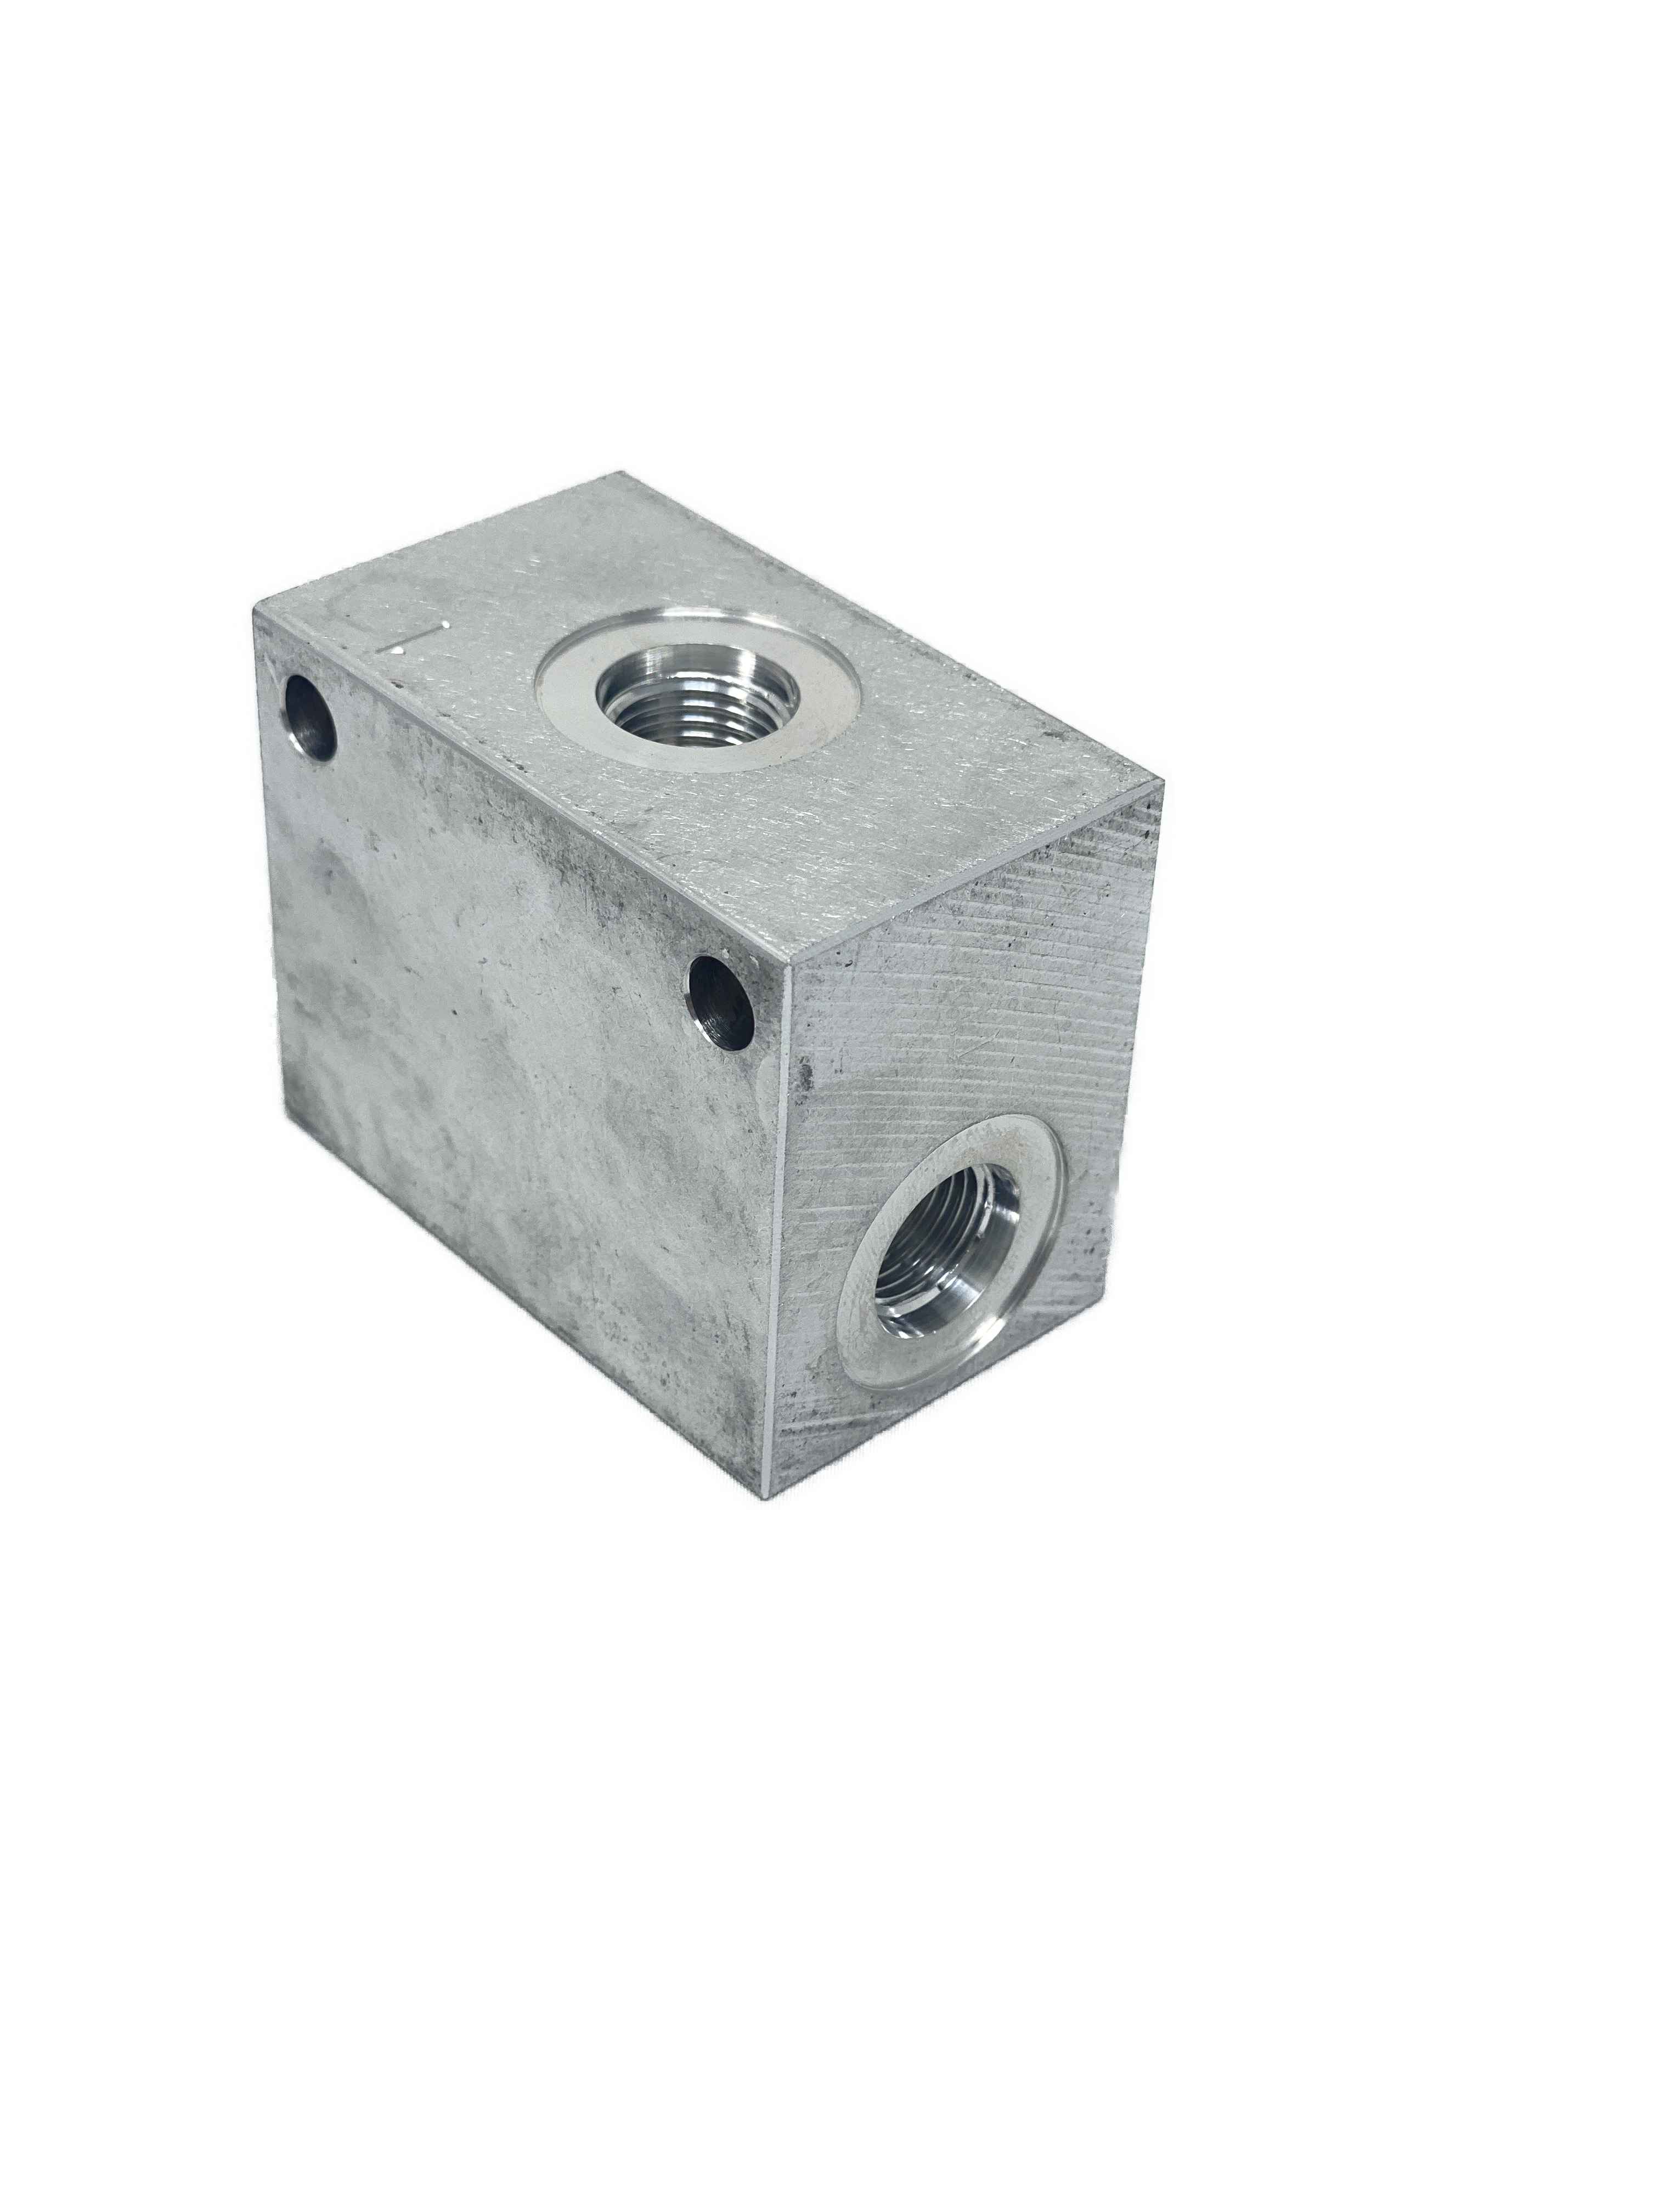 AC082CB8S : Daman Common Cavity Body, C-8-2 Cartridge Cavity, #8 SAE (1/2") Port Connections, 3000psi Rated, Aluminum, Without Gauge Port